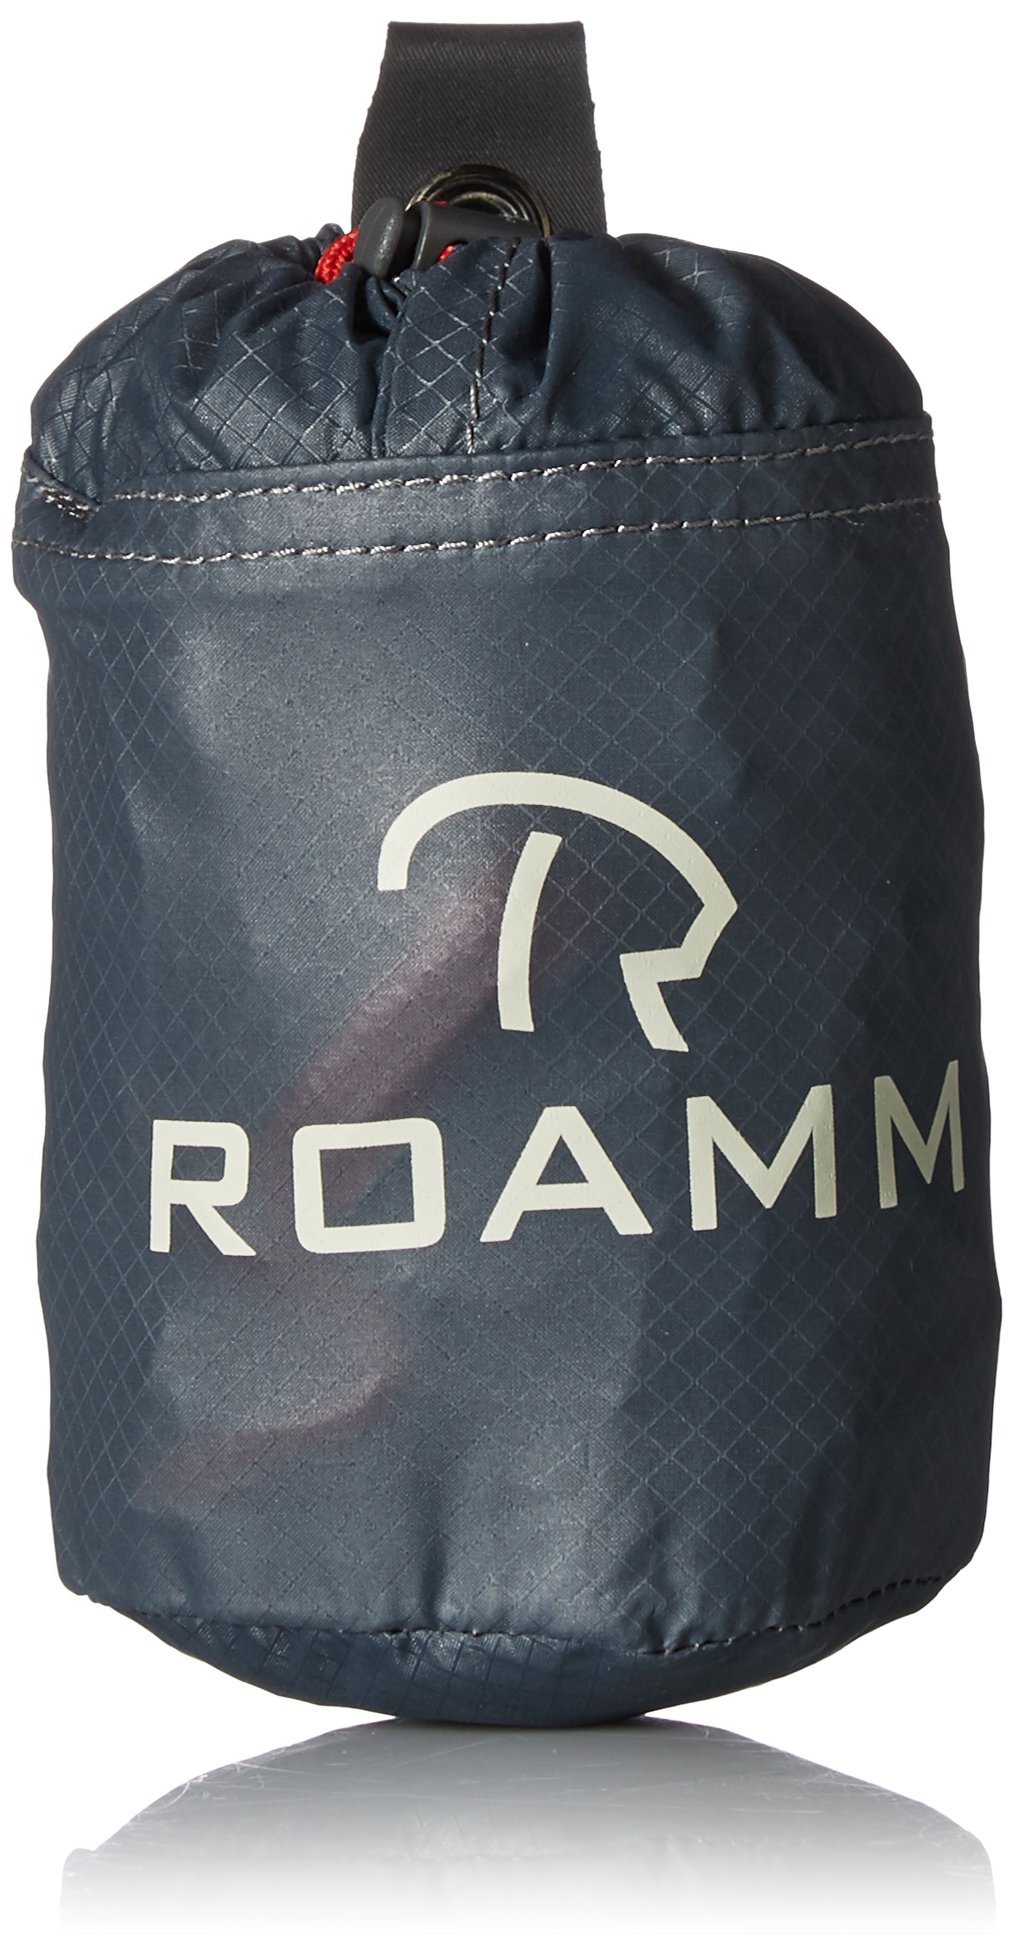 Roamm Cram 20 Ultralight Packable Backpack + Lightweight 3.5oz Bag Perfect for Camping, Hiking, Backpacking, and Outdoors for Men or Women